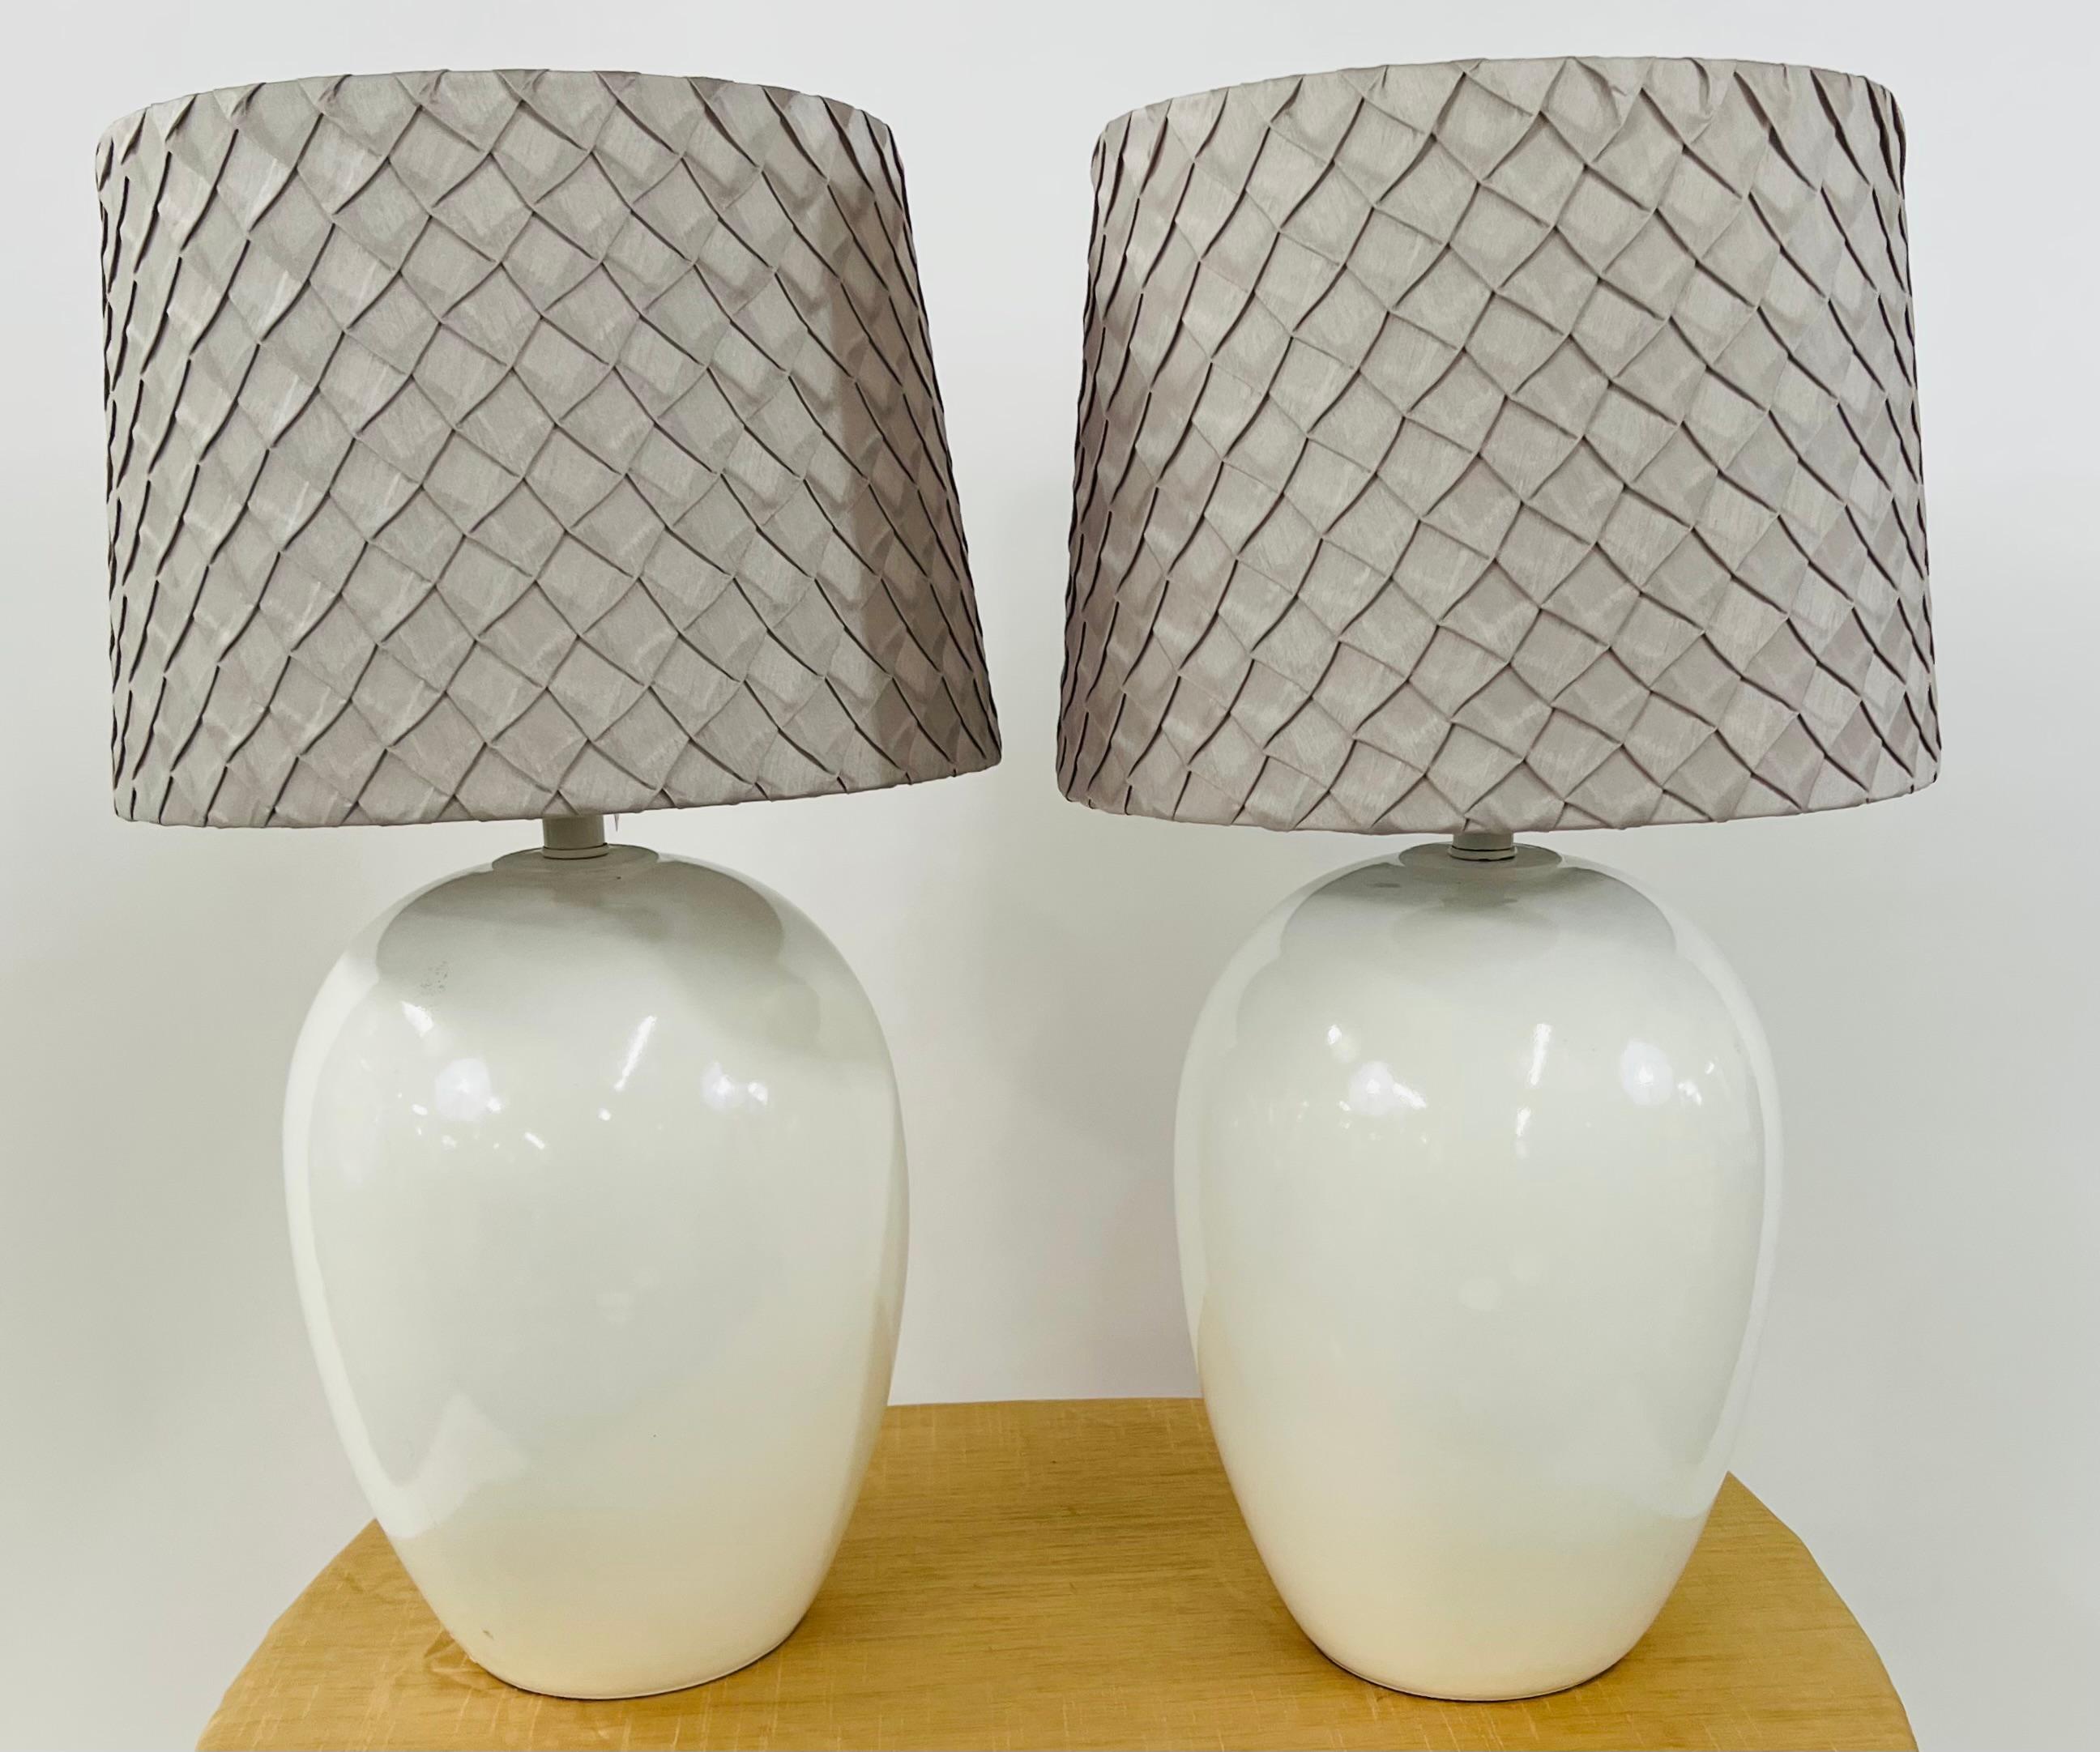 A pair of Mid-Century Modern ceramic table lamps. The beautiful lamps feature a minimalistic design in white color. The shades are custom and new. The lamps will complement the style of any room or style. Elegant , the neutral colors of the lamp and